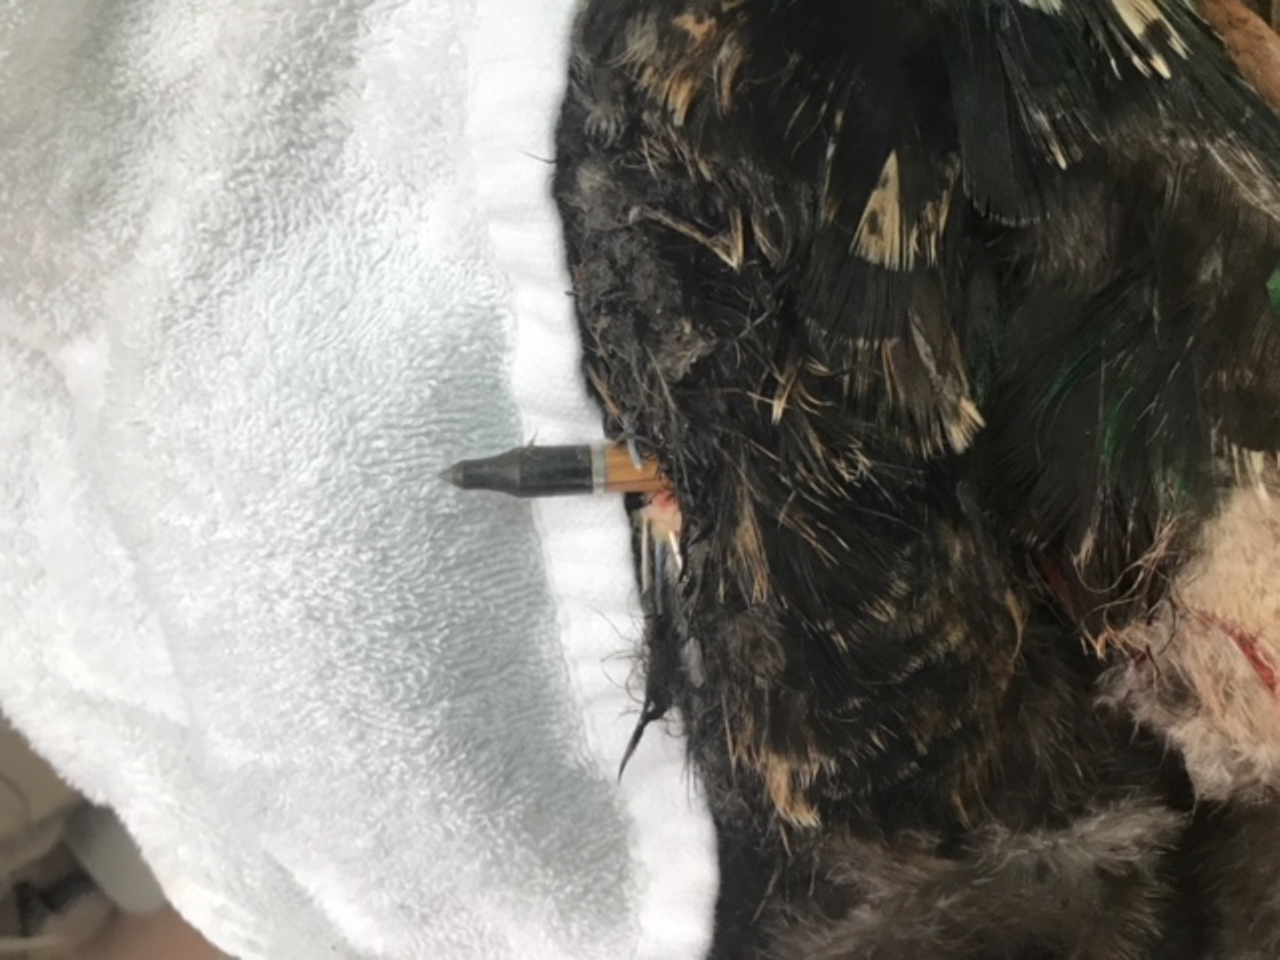 Another view of the arrow that some person walking around Dunedin shot through a defenseless bird for reasons unknown.